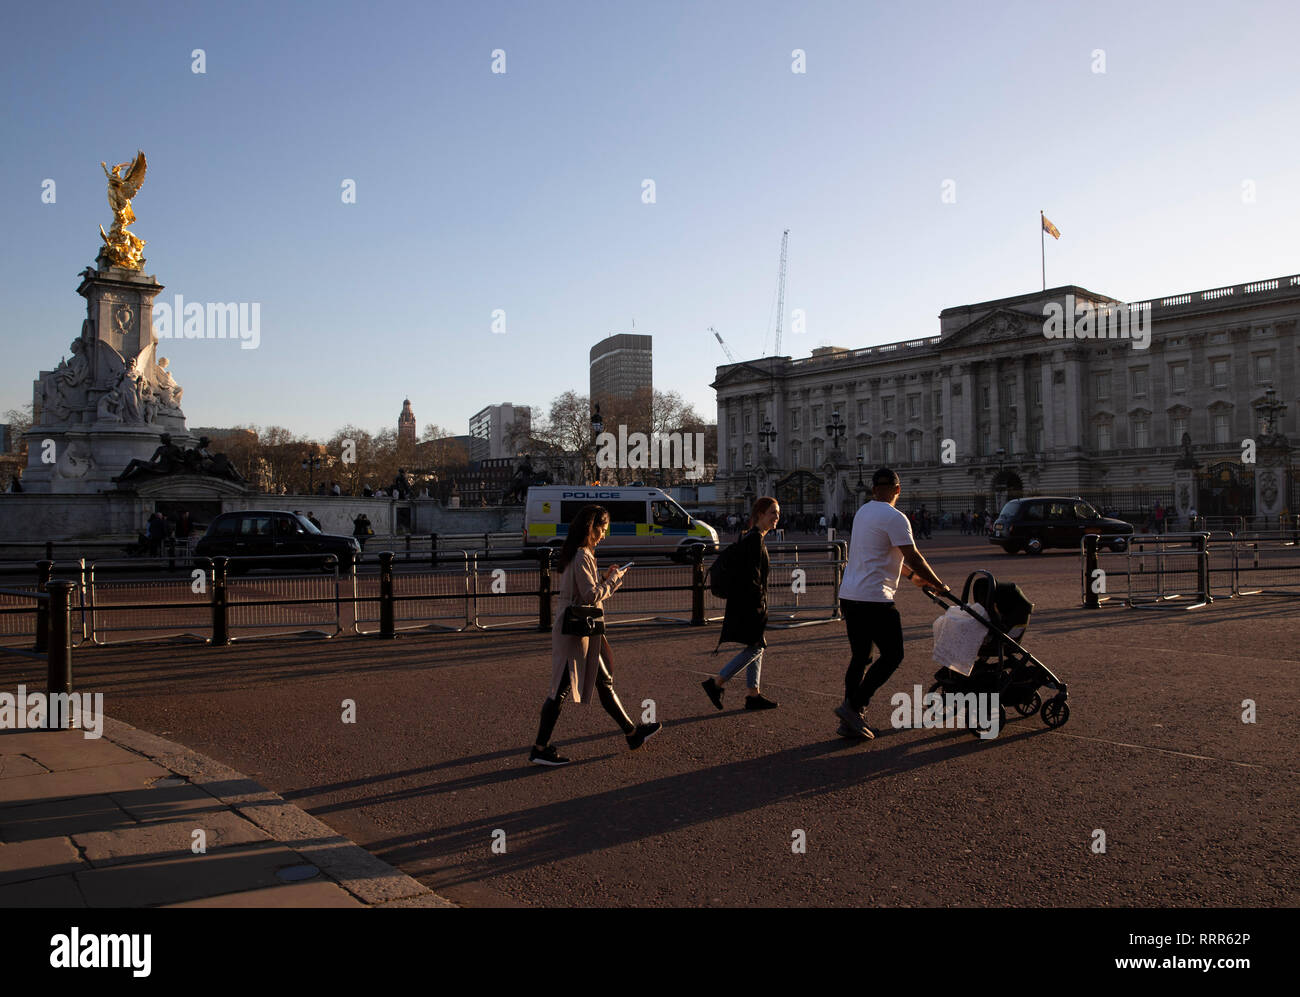 London, Britain. 26th Feb, 2019. People pass by the Buckingham Palace in London, Britain, on Feb. 26, 2019. Britain experienced its warmest February day on record Monday as the highest temperature reached 20.3 degrees Celsius in Wales. It was also the first time that a temperature exceeding 20 degrees in winter was recorded. It broke Britain's record of the highest February temperature of 19.7 degrees set at Greenwich in 1998. Credit: Han Yan/Xinhua/Alamy Live News Stock Photo